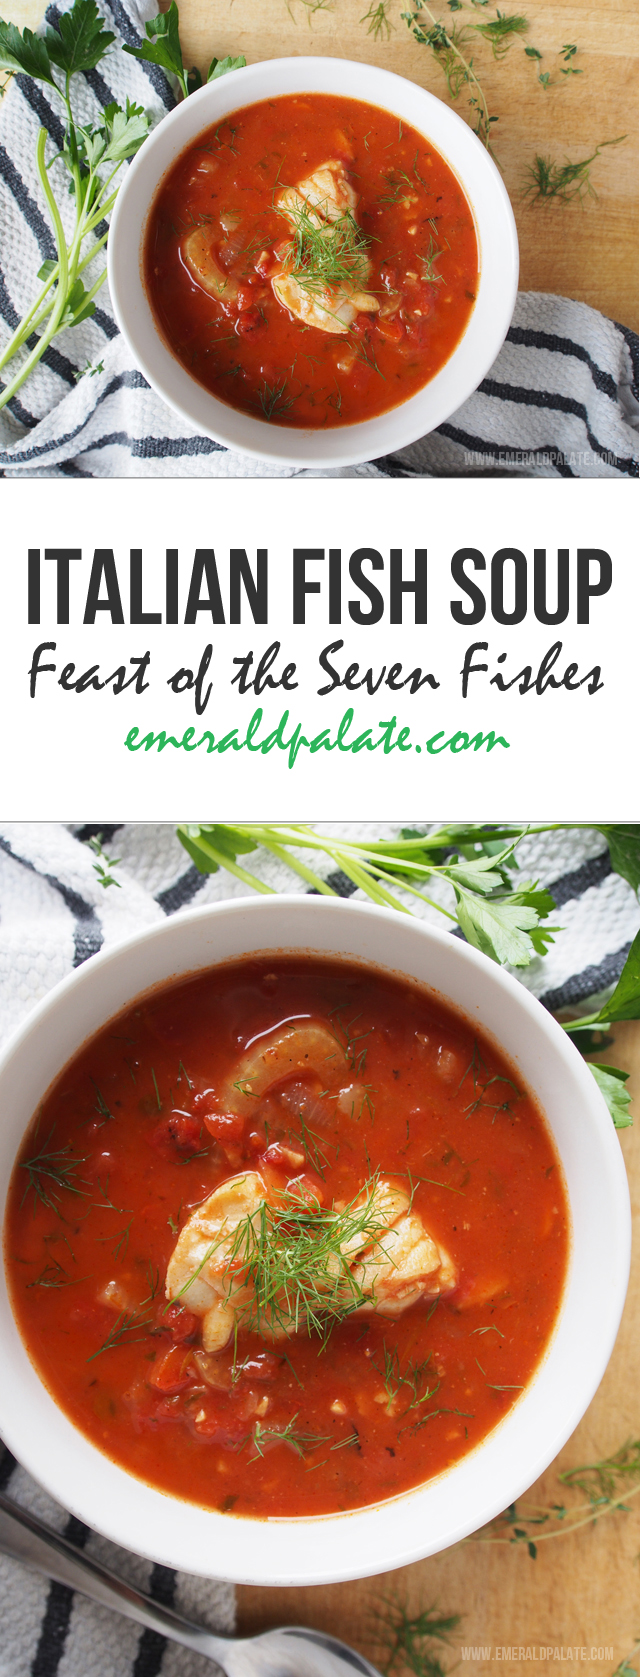 Italian Fish Soup: A Feast of the Seven Fishes Recipe